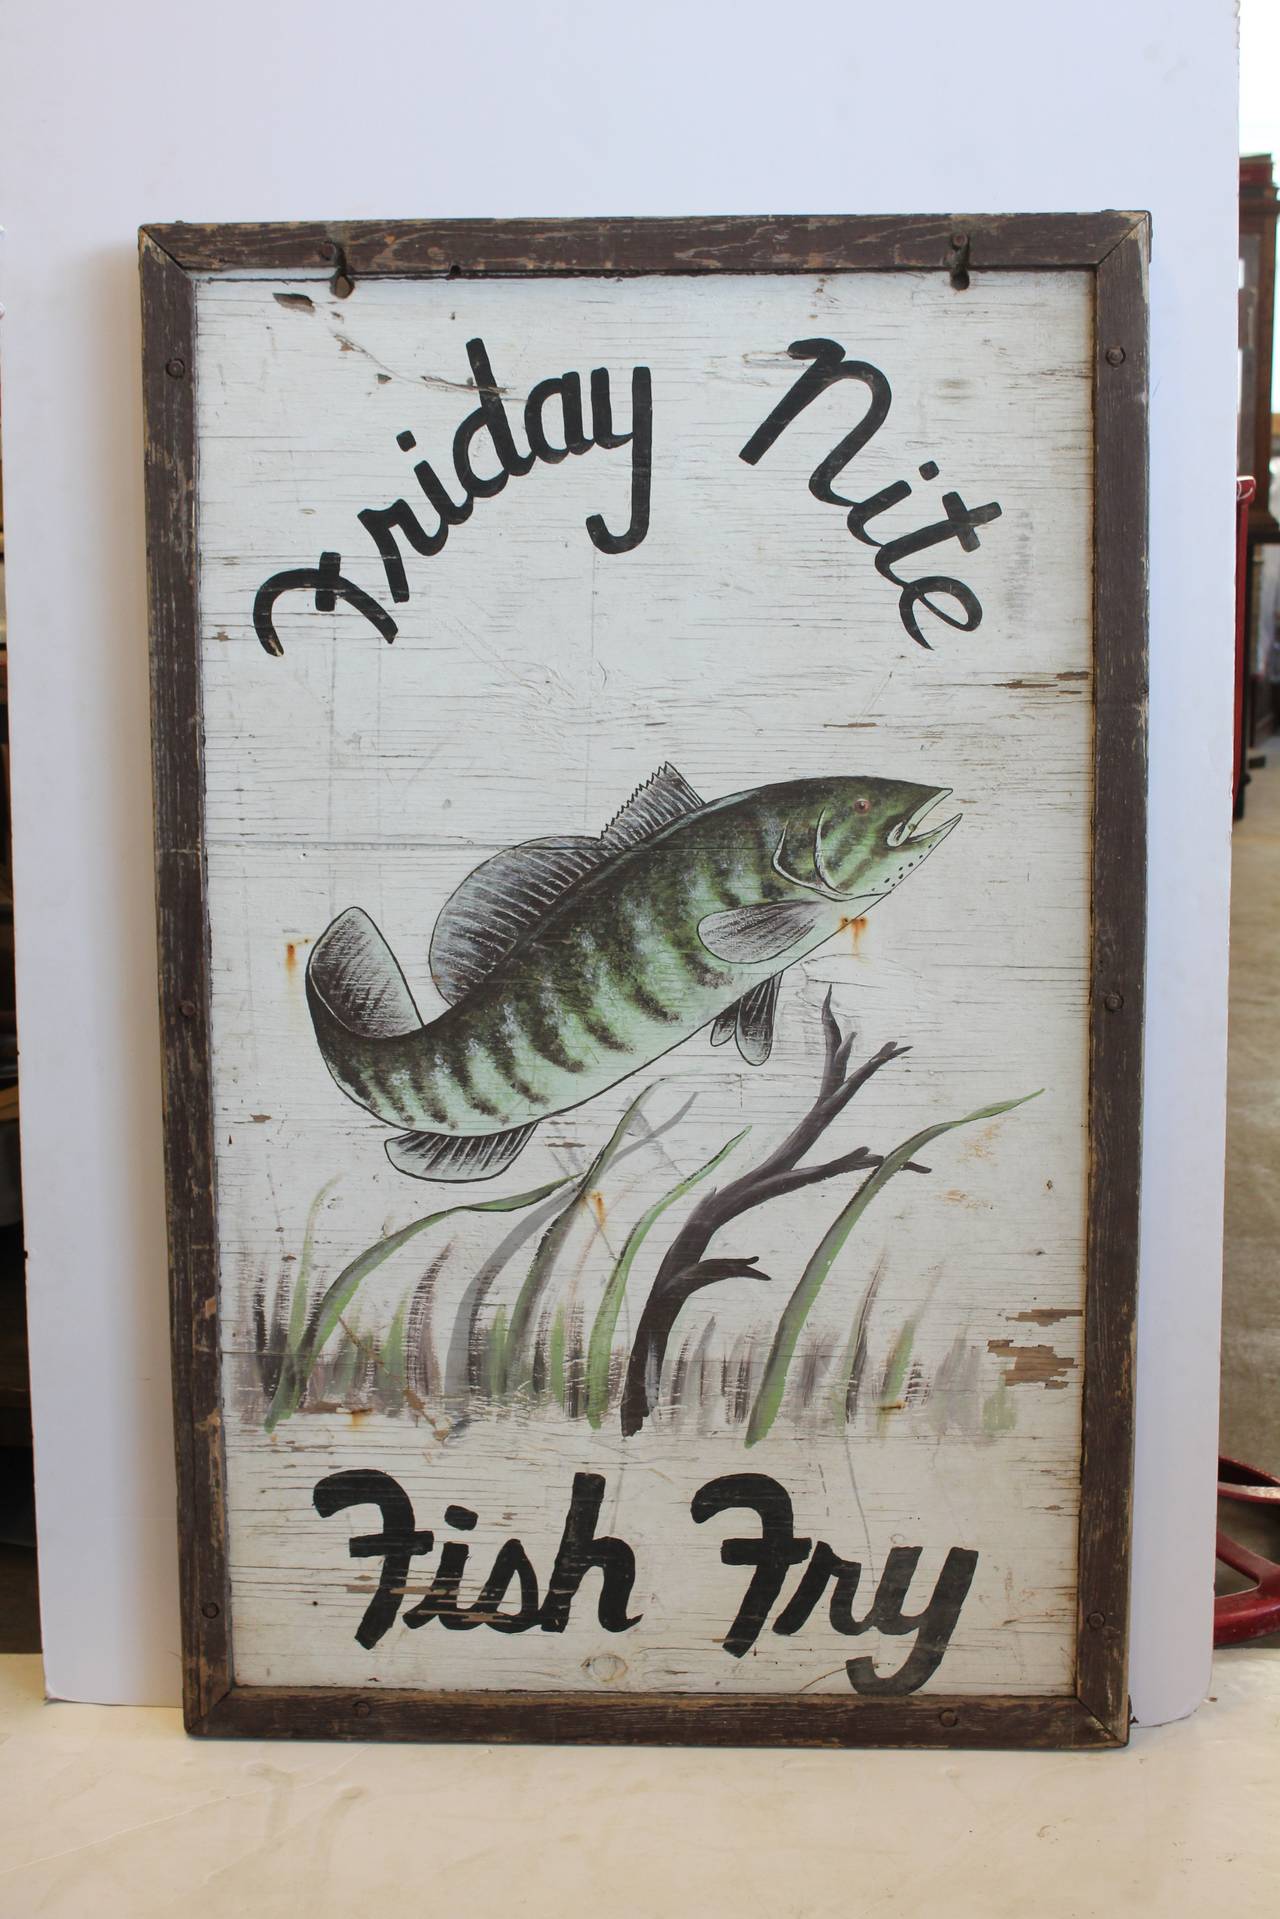 1940s Folk Art hand-painted double-sided wood sign 